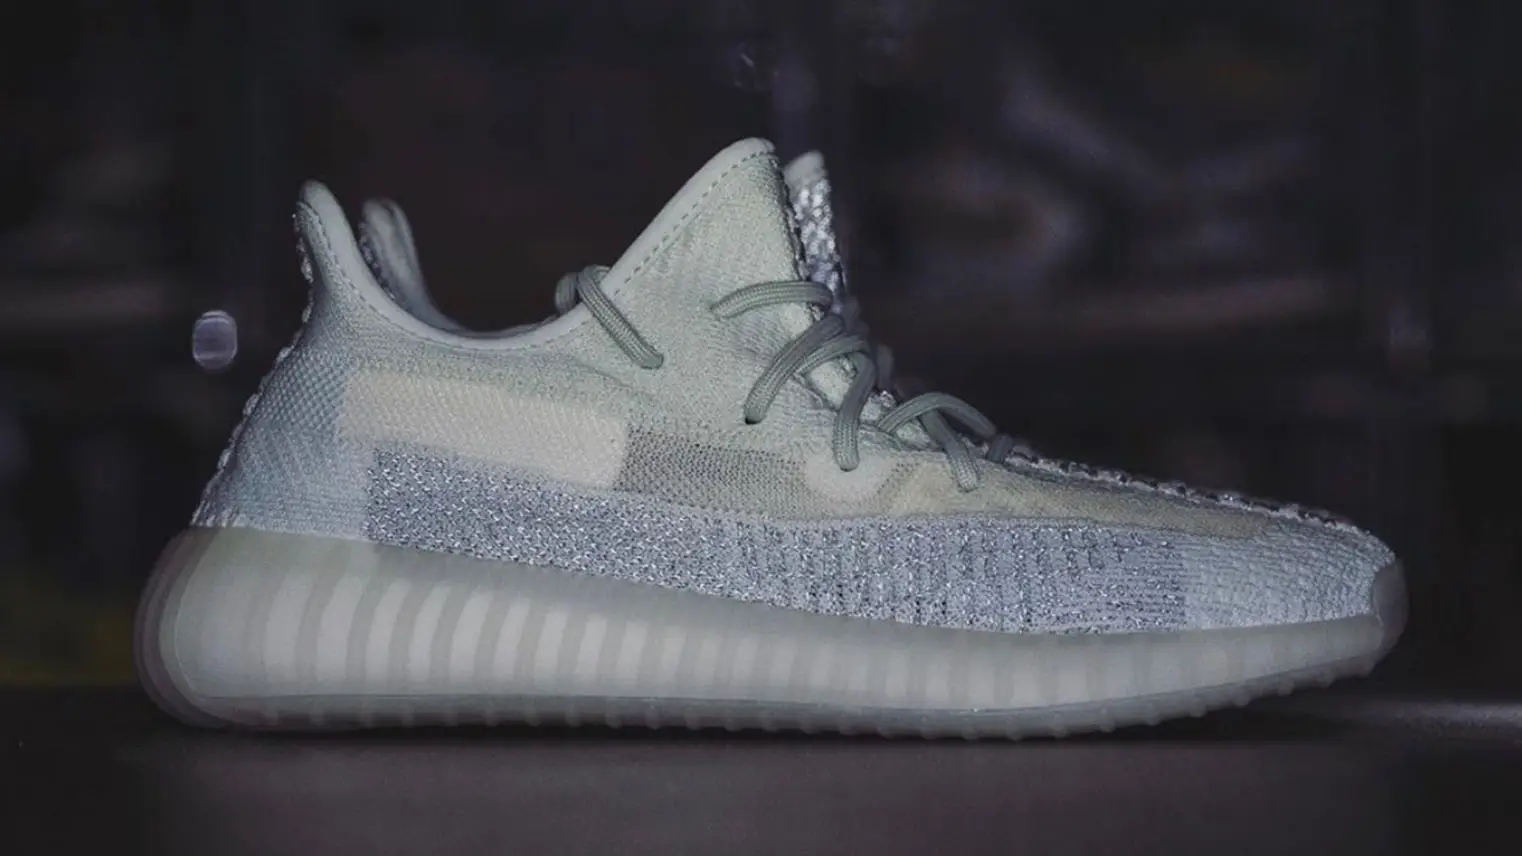 A Closer Look At The adidas Yeezy Boost 350 V2 